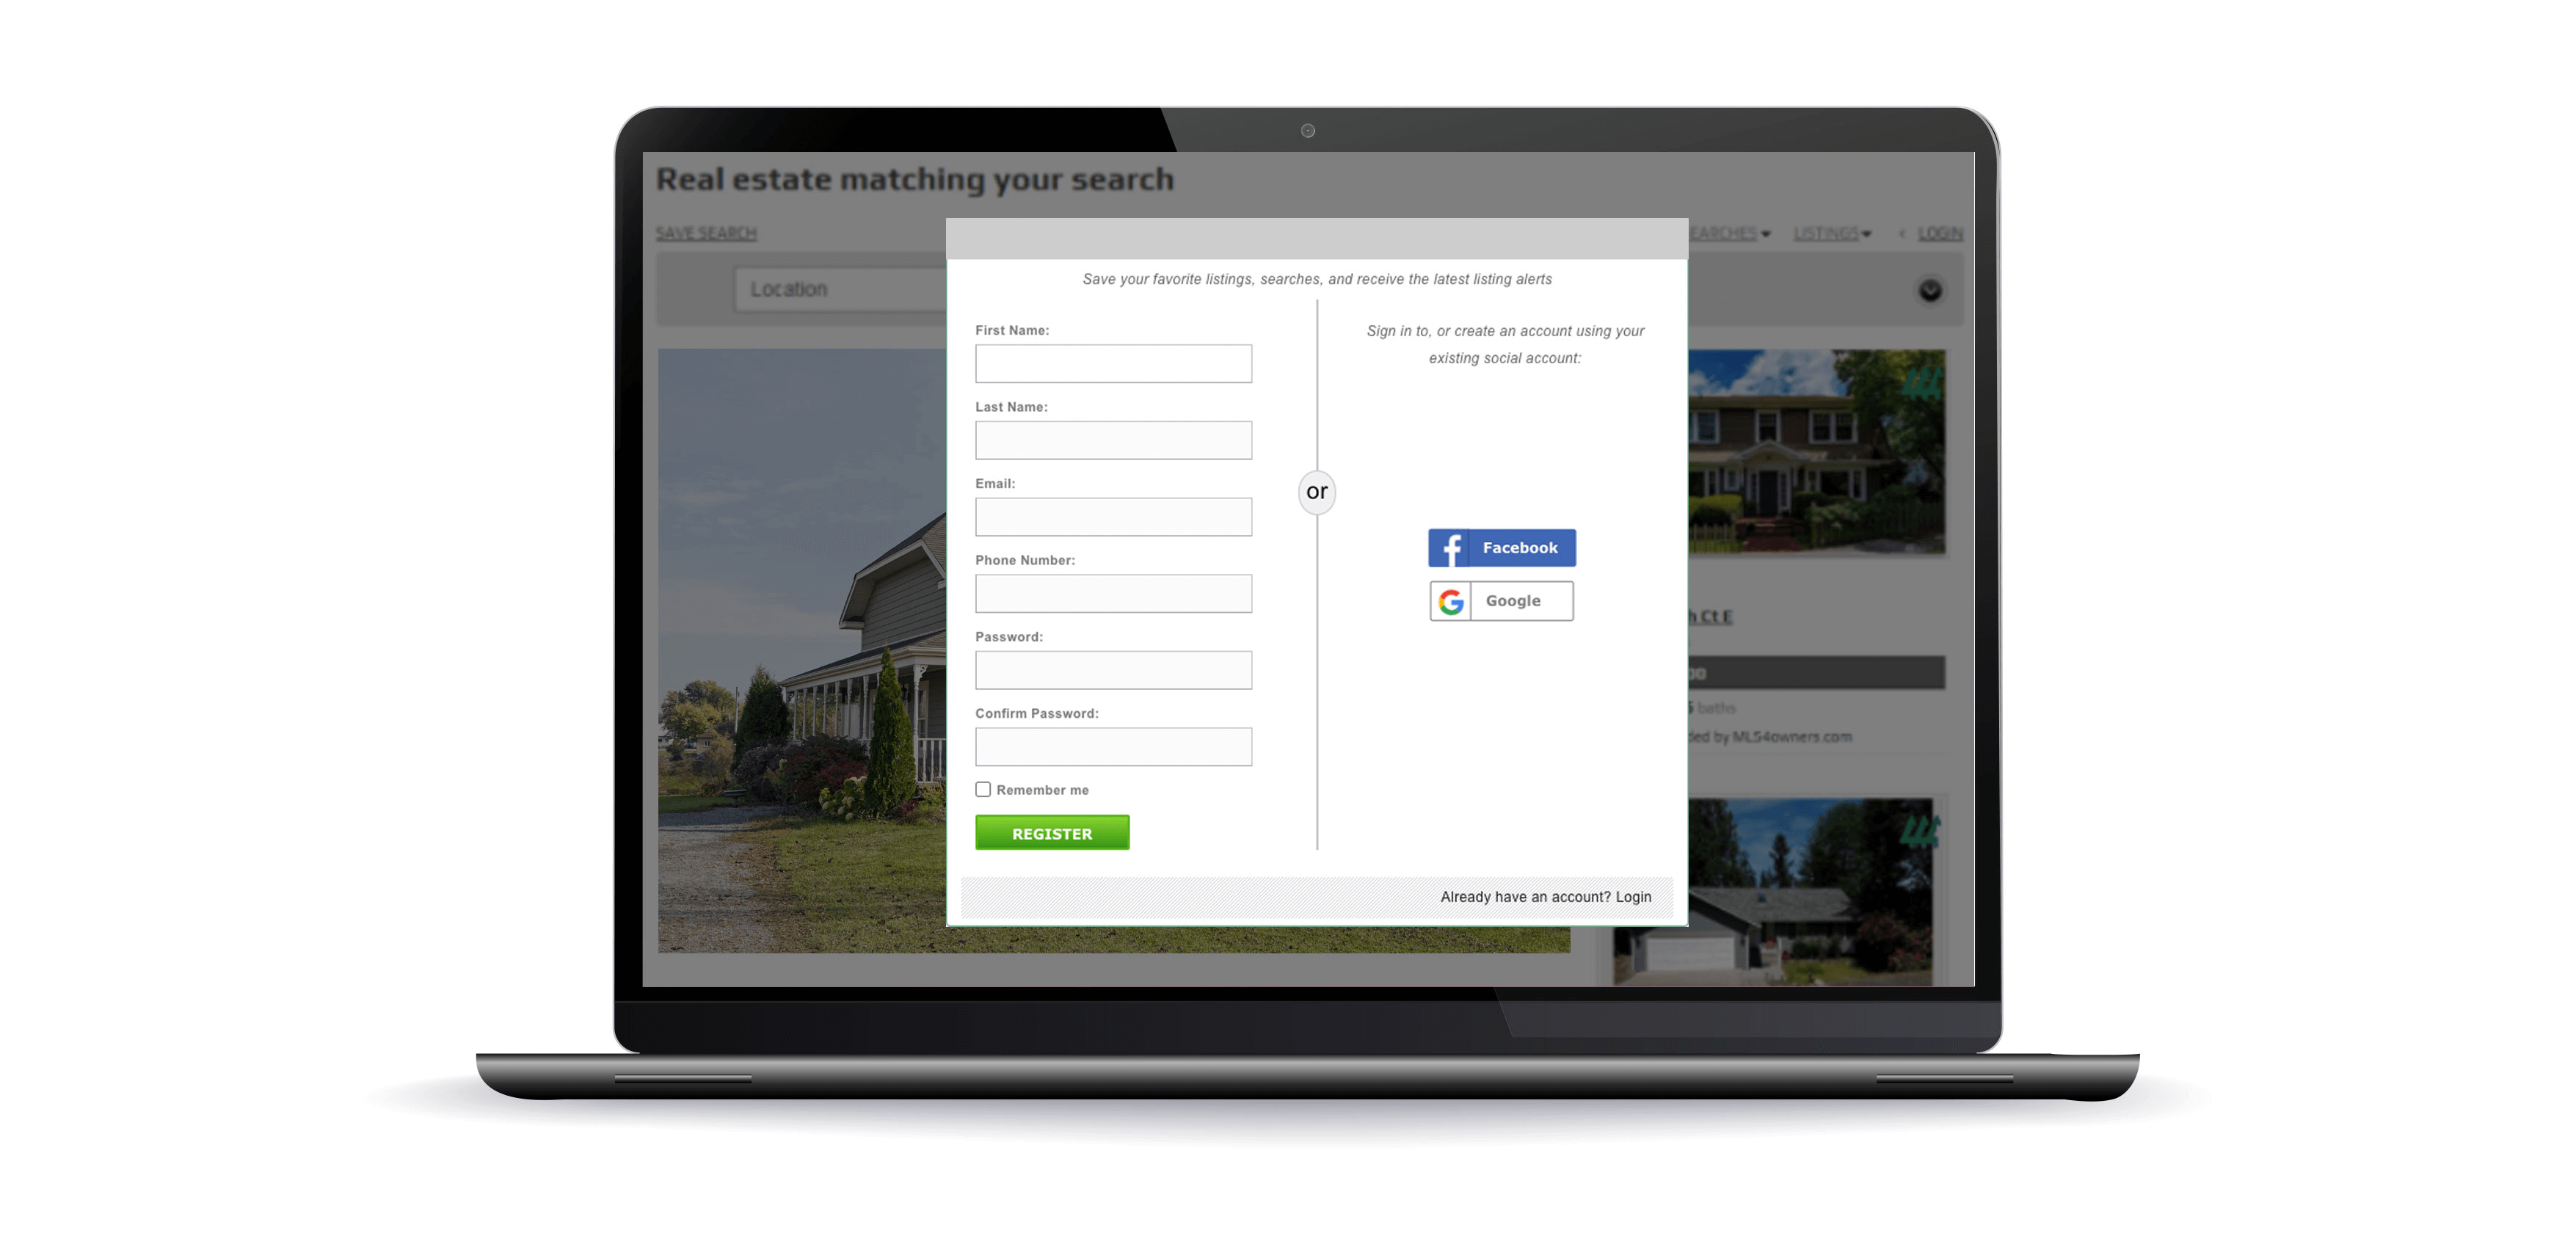 Turn visitors into leads with forms for scheduling showings, favoriting listings, saving property search criteria, and contacting you for more information.